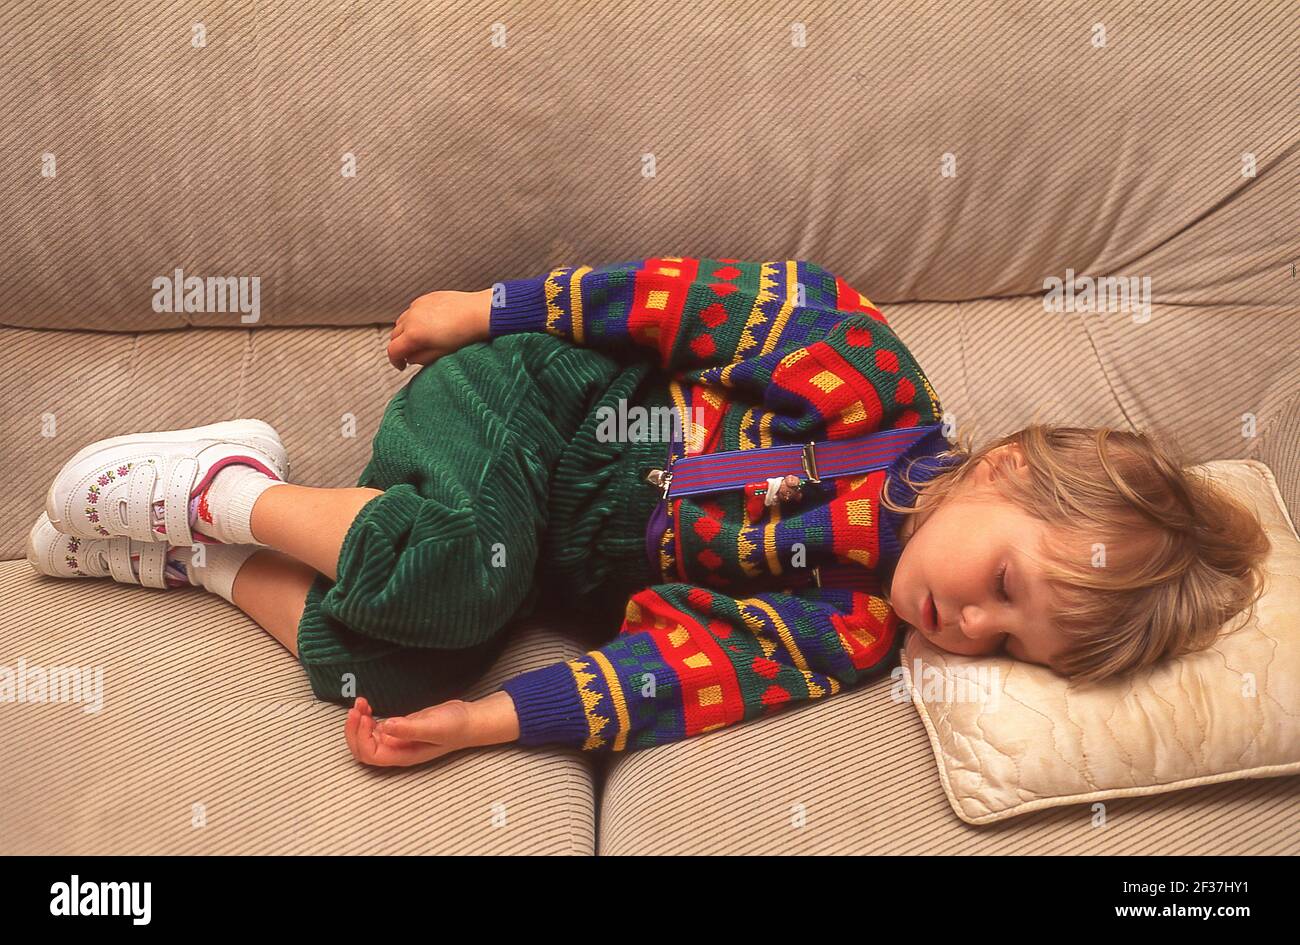 Young girl asleep on a couch, Winkfield, Berkshire, England, United Kingdom Stock Photo